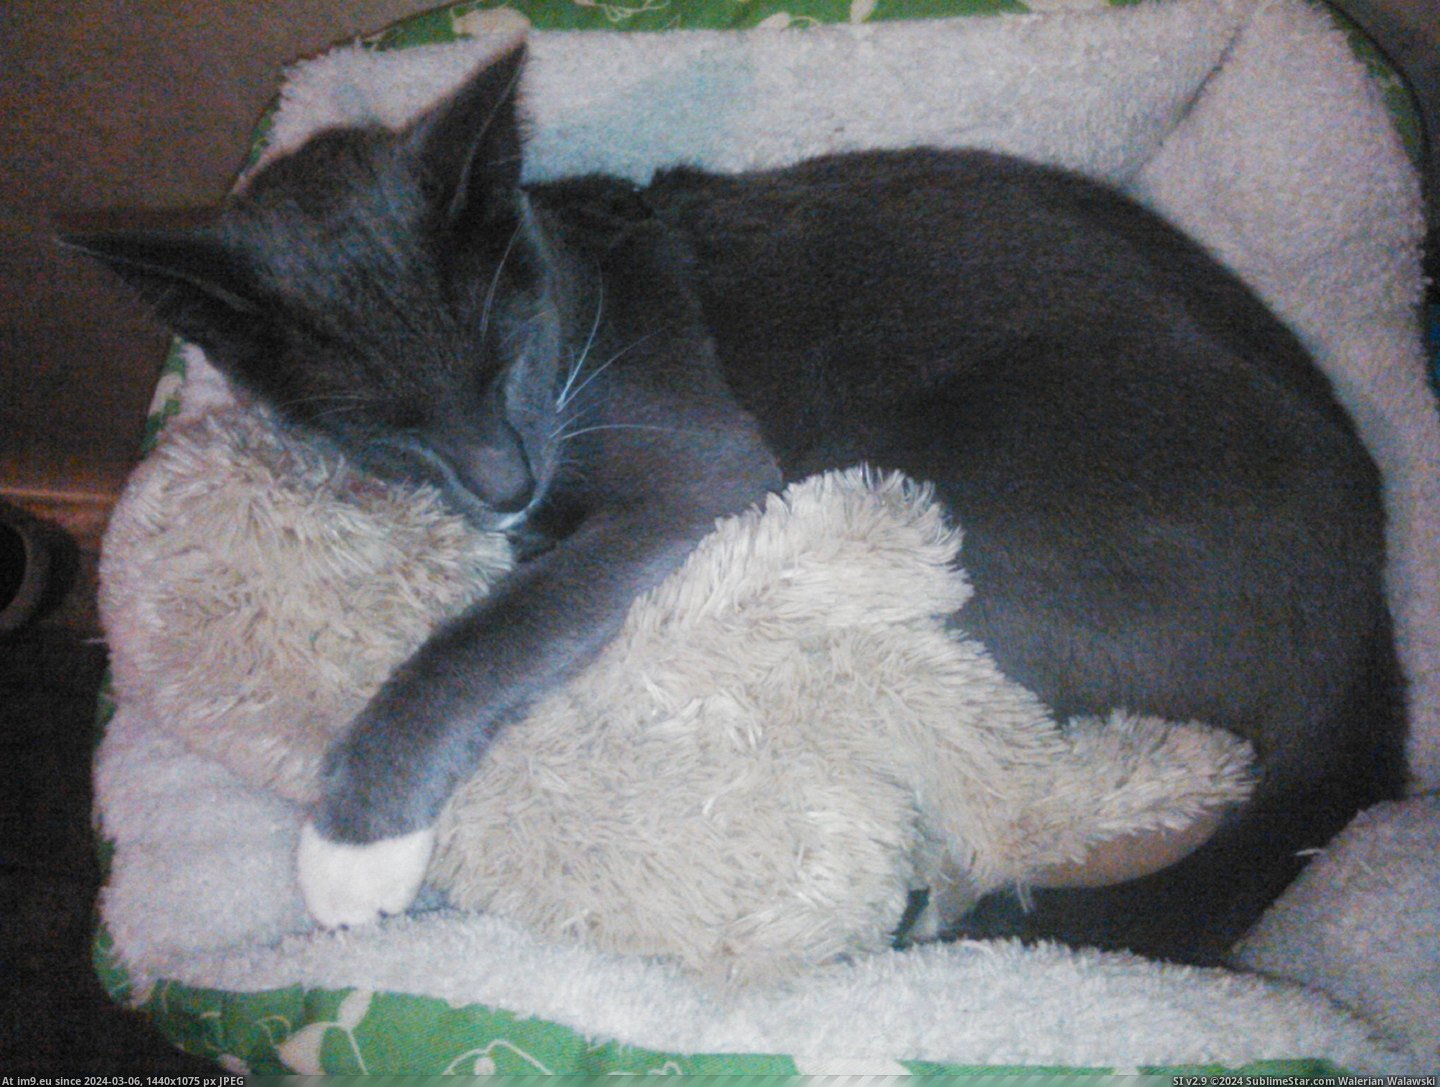 #Cats #Loves #Snuggle #Bear #Tesla [Cats] Tesla loves to snuggle with his bear Pic. (Bild von album My r/CATS favs))